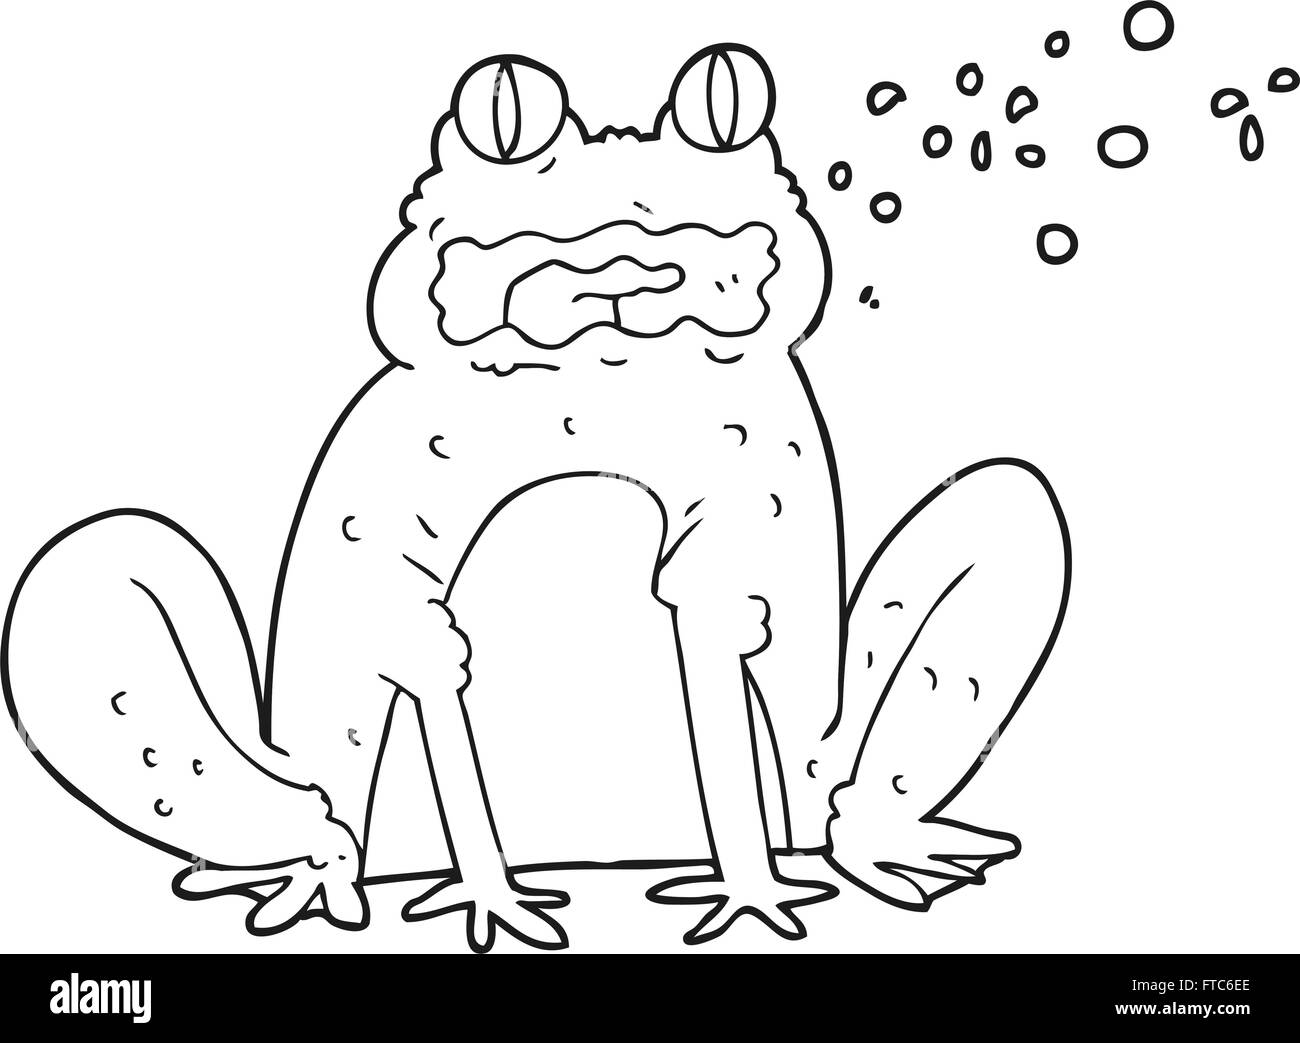 freehand drawn black and white cartoon burping frog Stock Vector